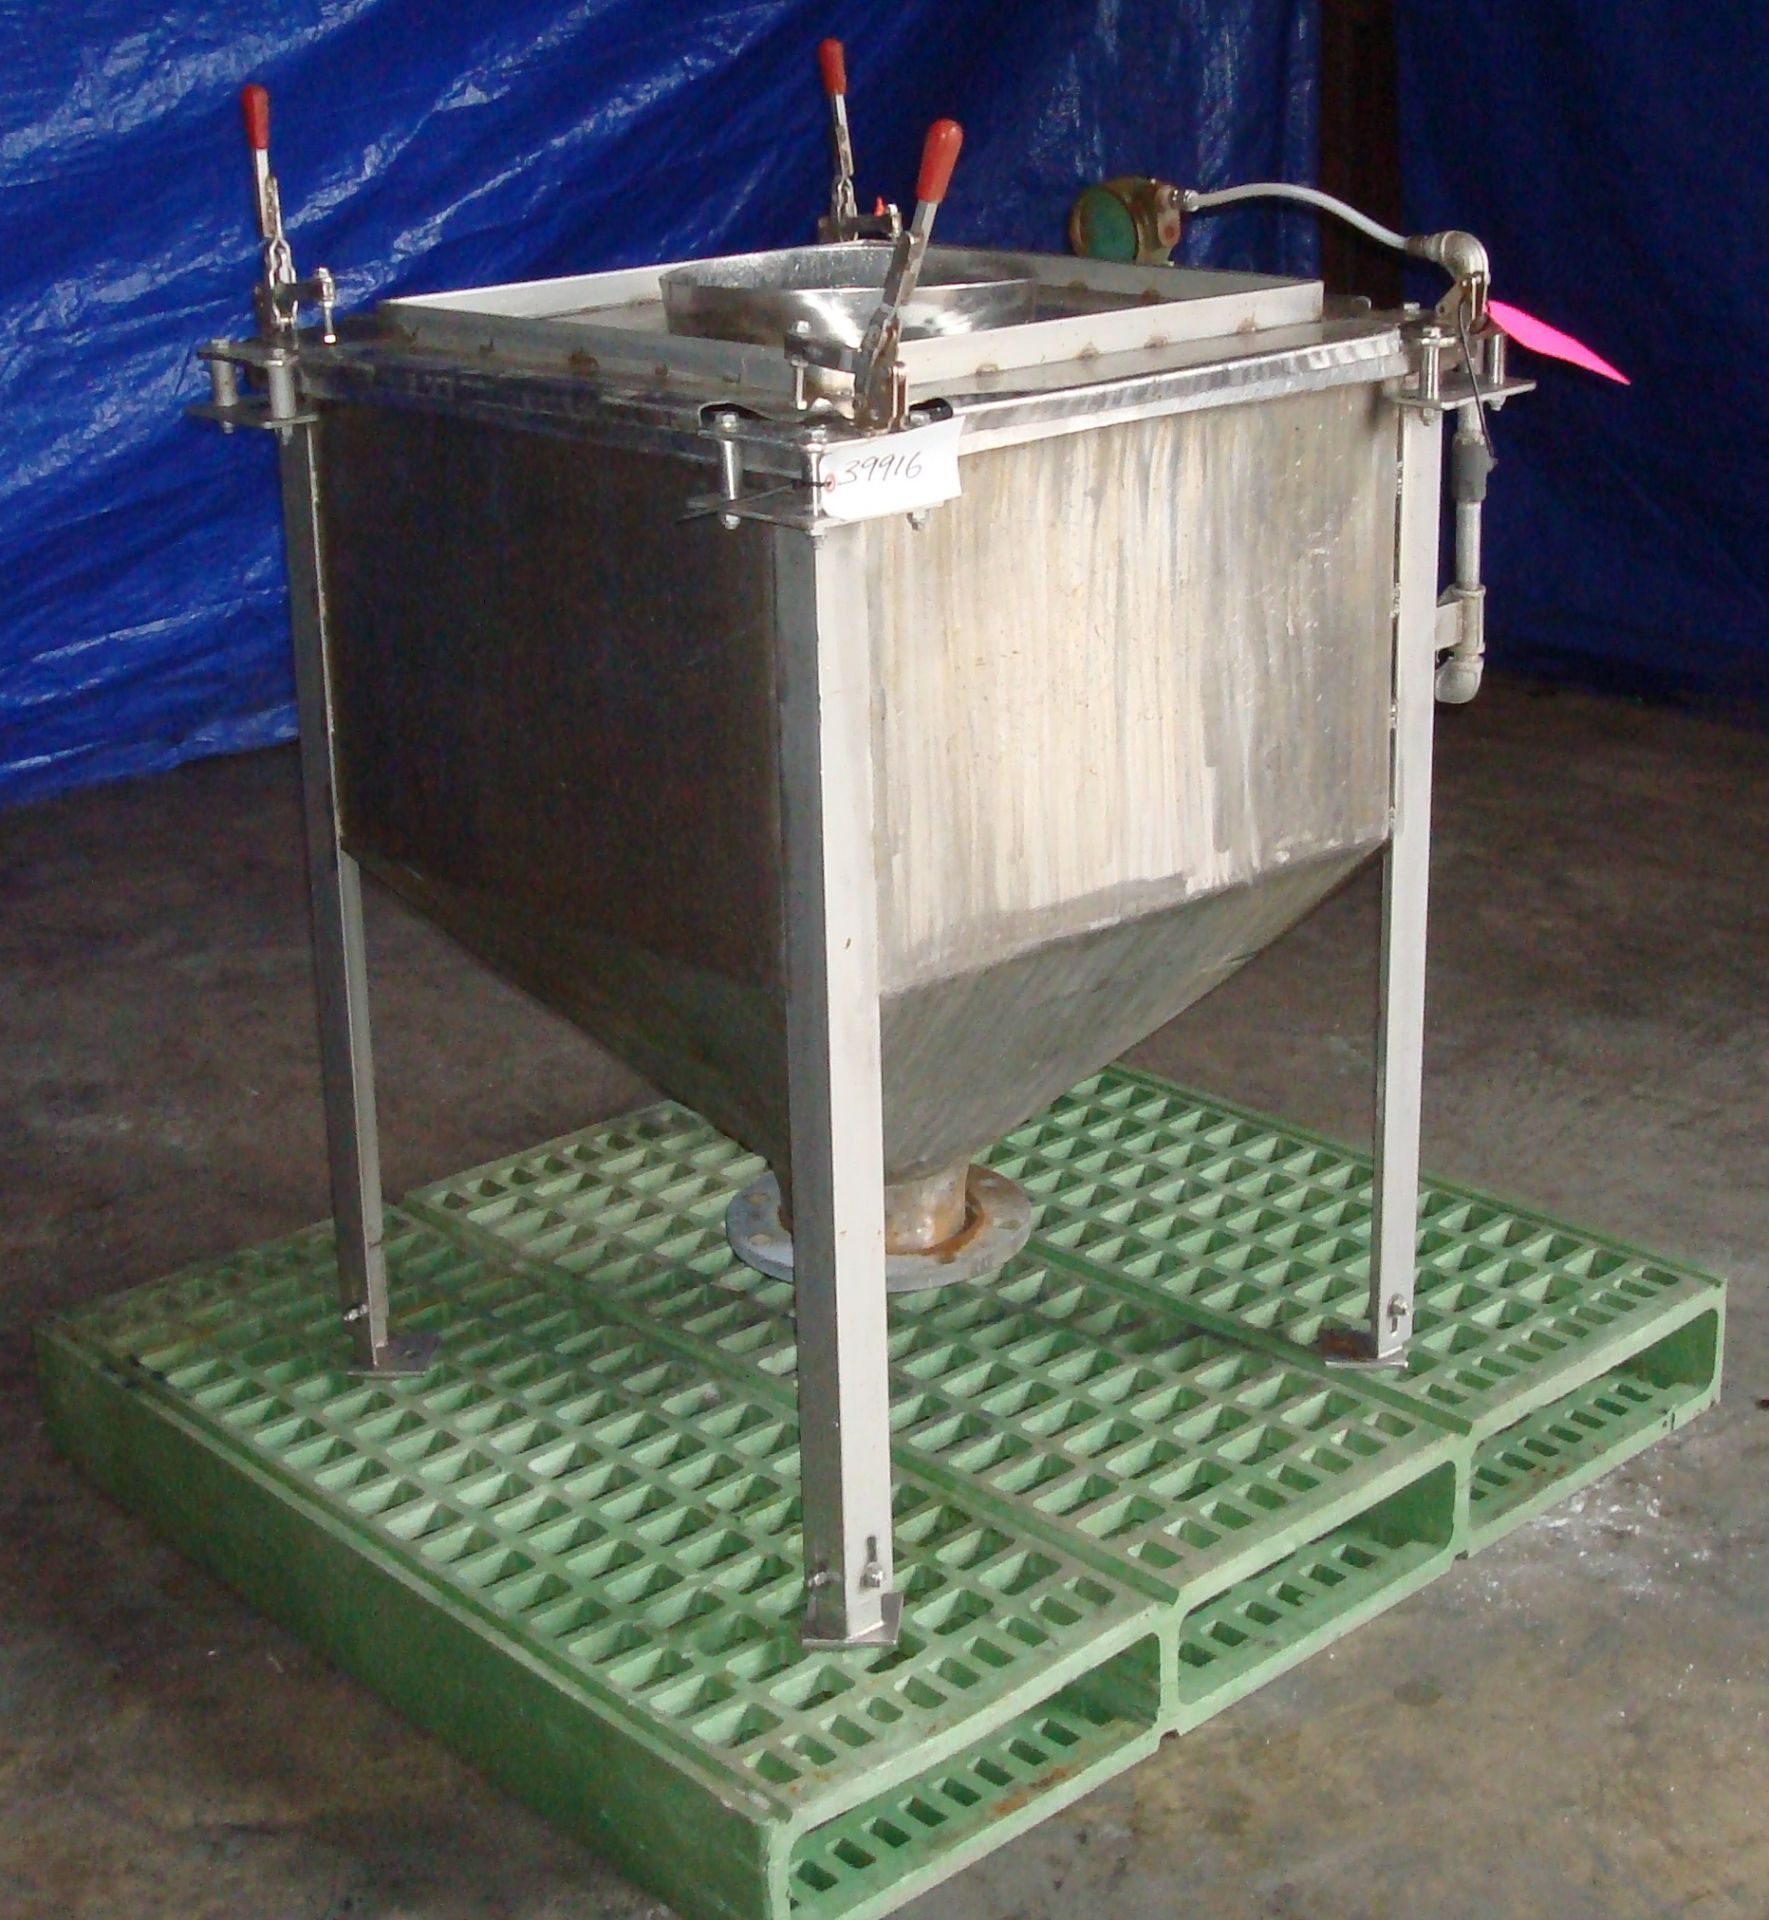 Stainless steel screened dump station